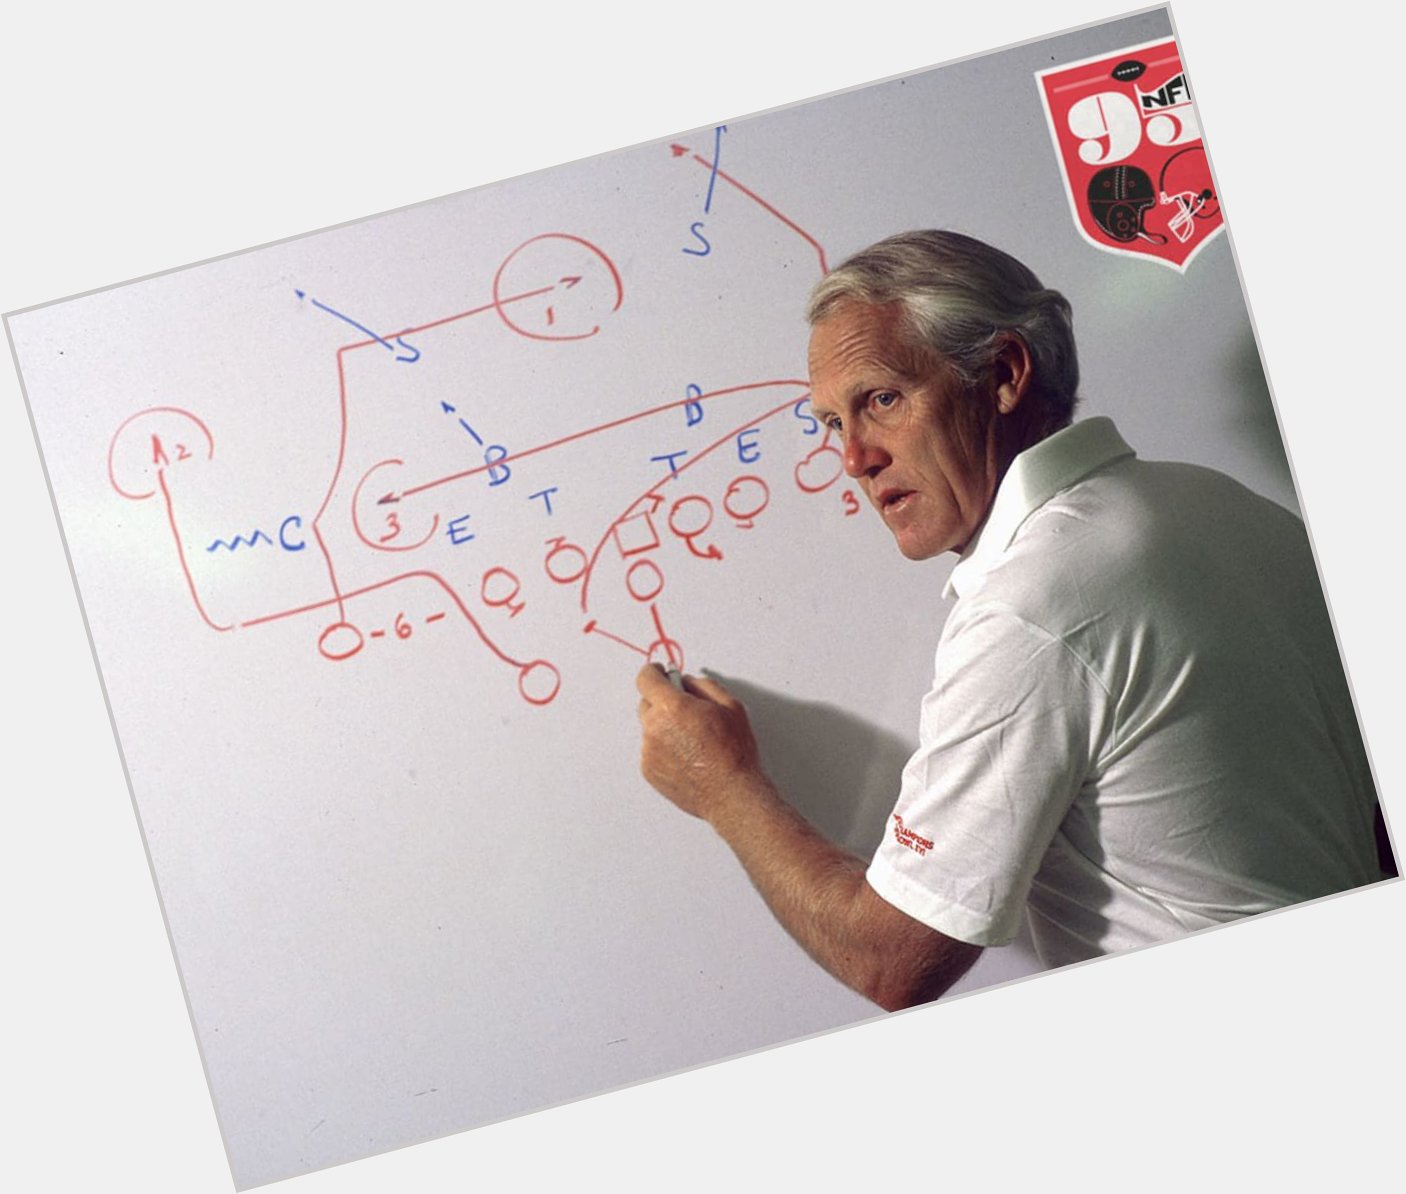 Happy Birthday Bill Walsh. All of our lives would be different without you. We miss you. 